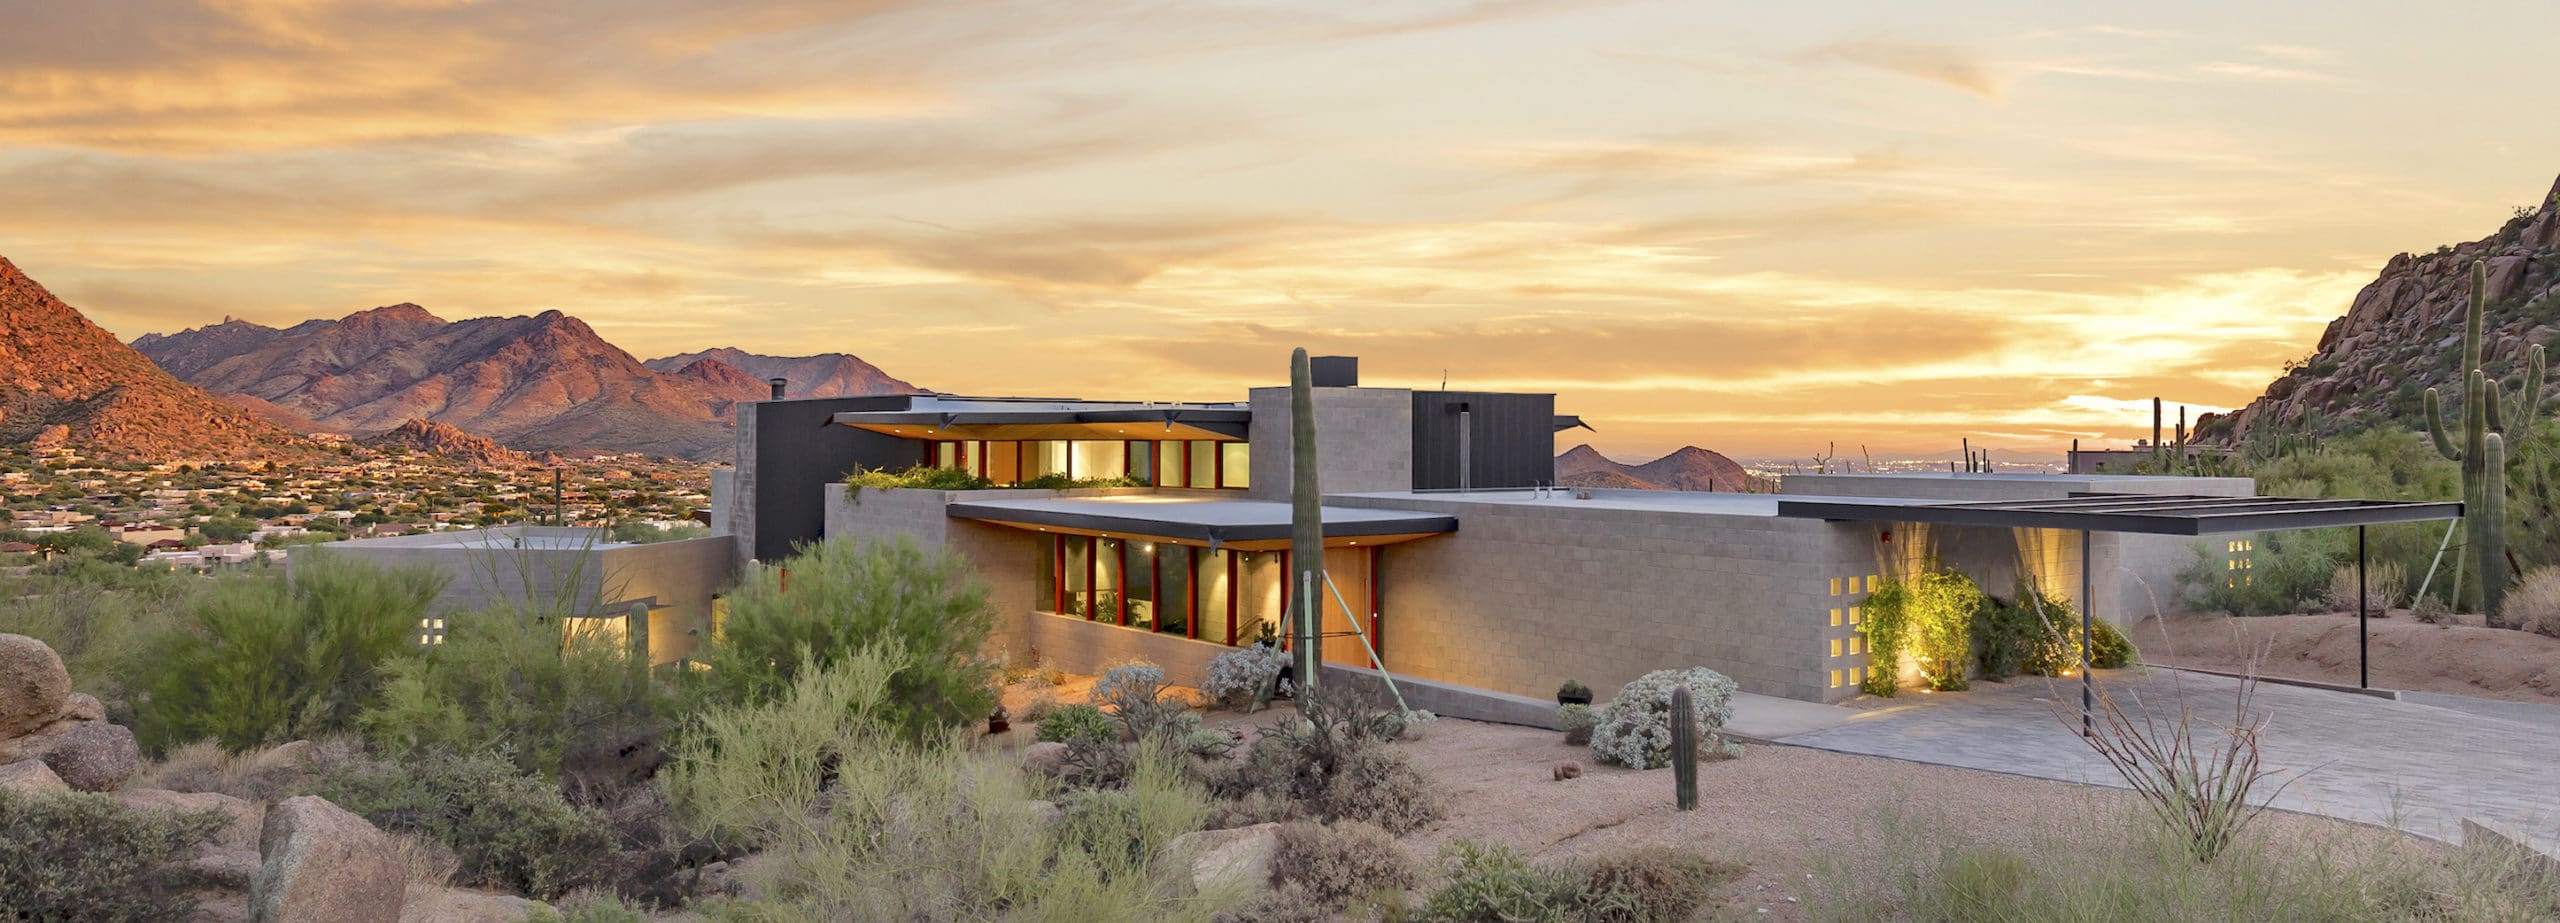 Why Experienced Realtors Are Essential for Buying a Home in Scottsdale